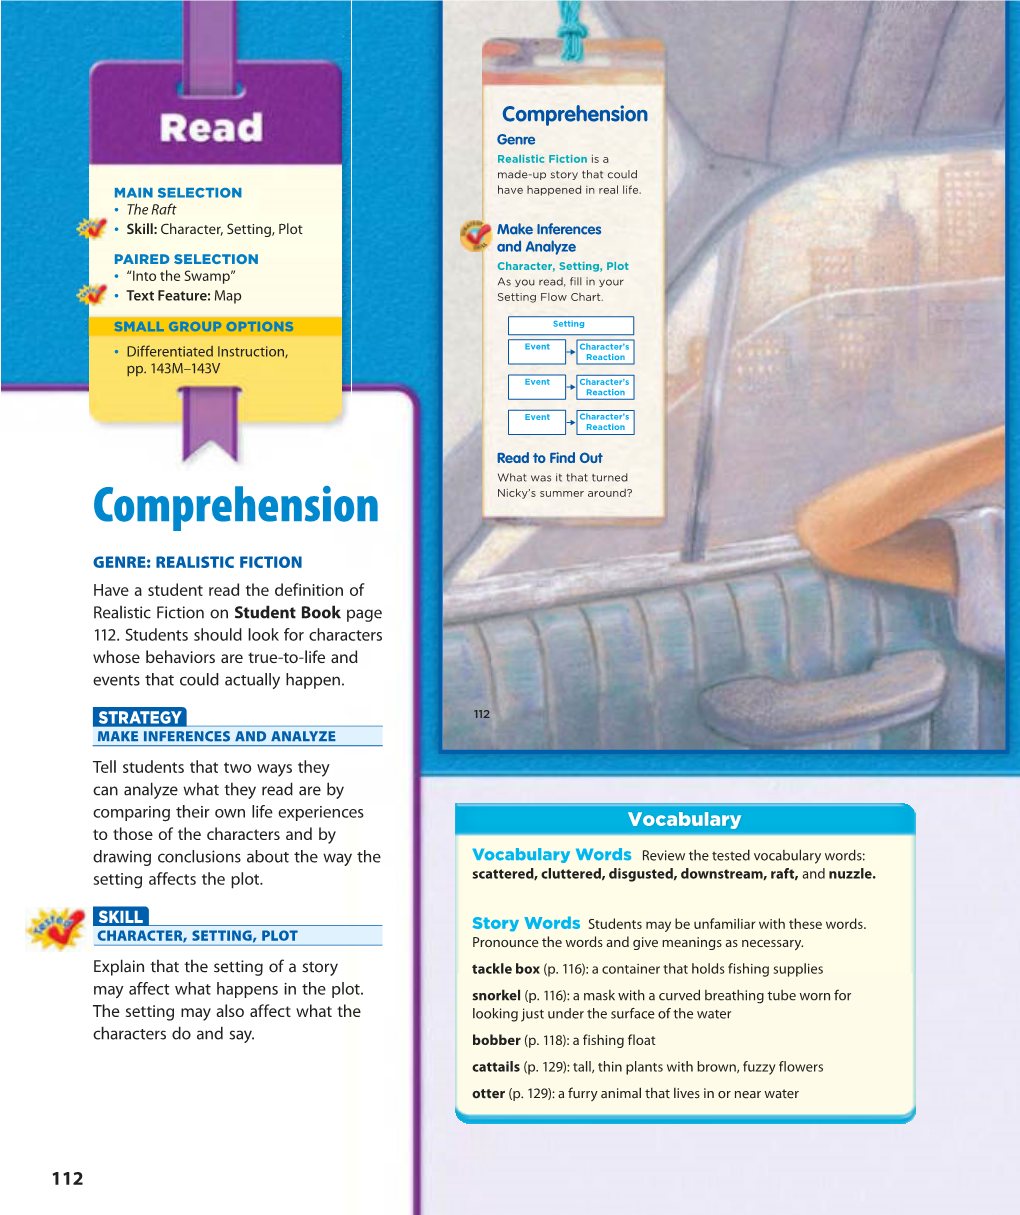 Read the Raft Use the Questions and Think Alouds to Support Instruction About the Comprehension Strategy and Skill